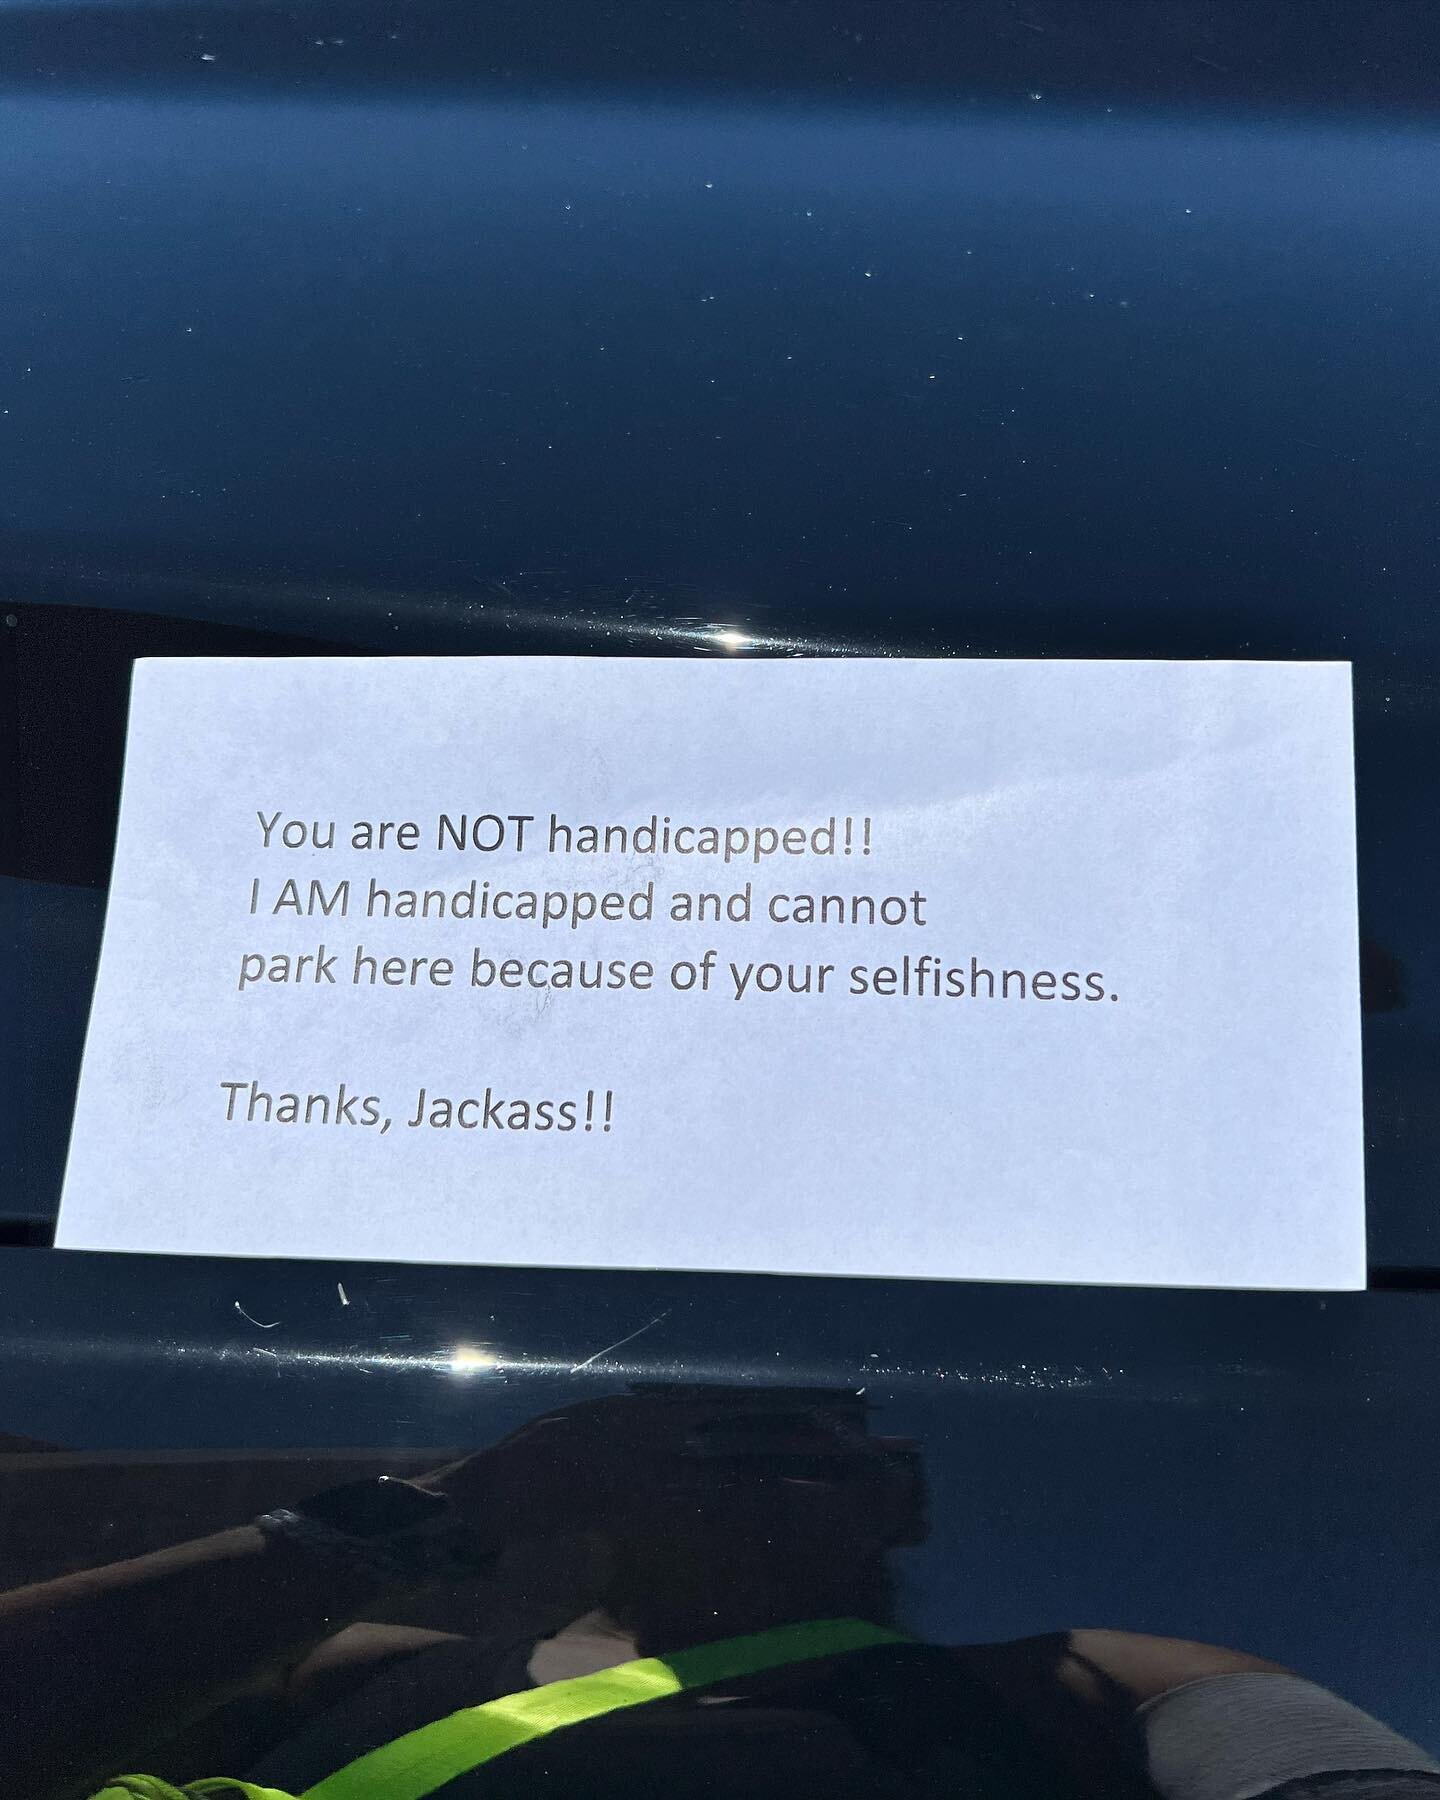 Reminder: Be Kind 

I received this note on my car while I ran into AJ&rsquo;s to buy a few things.

Unfortunately, I can count on my one hand (pun intended) how often this type of thing happens to me, especially while wearing my passive prosthetic a